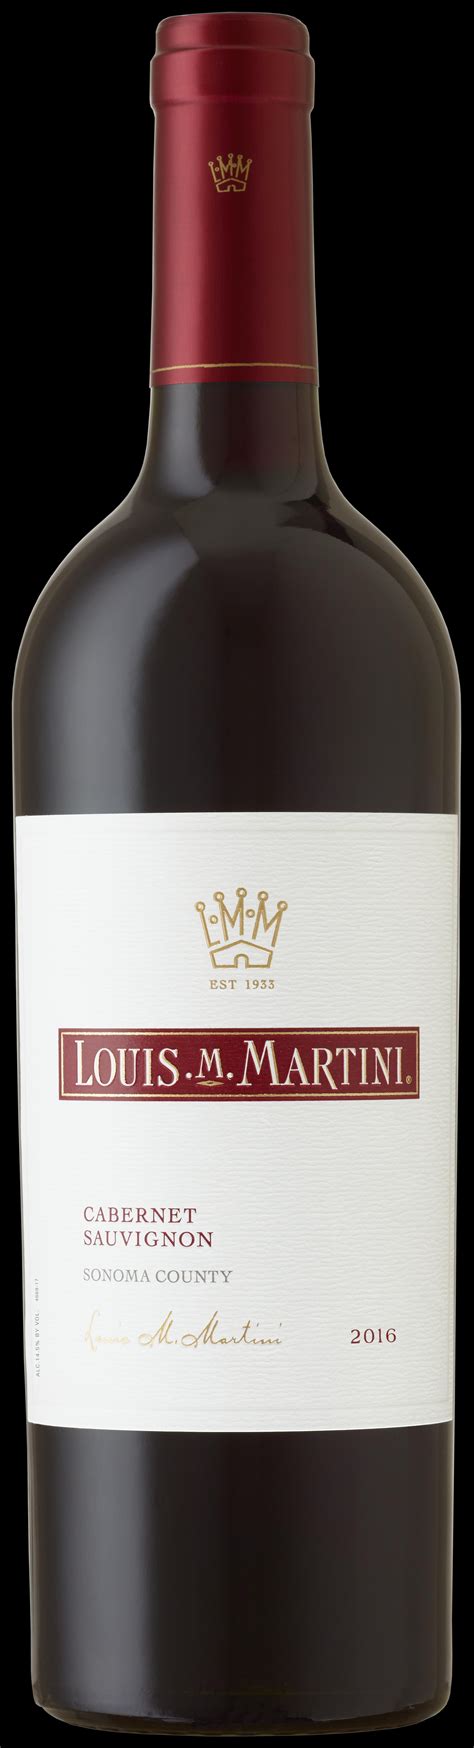 Louis m martini. Louis Martini Lot 1 Cabernet Sauvignon 2017 from Napa Valley, California - The pinnacle of Louis Martini's portfolio, Lot No. 1 is Cabernet Sauvignon at its peak form of expression. This wine showcases standout blocks from iconic Napa ... 